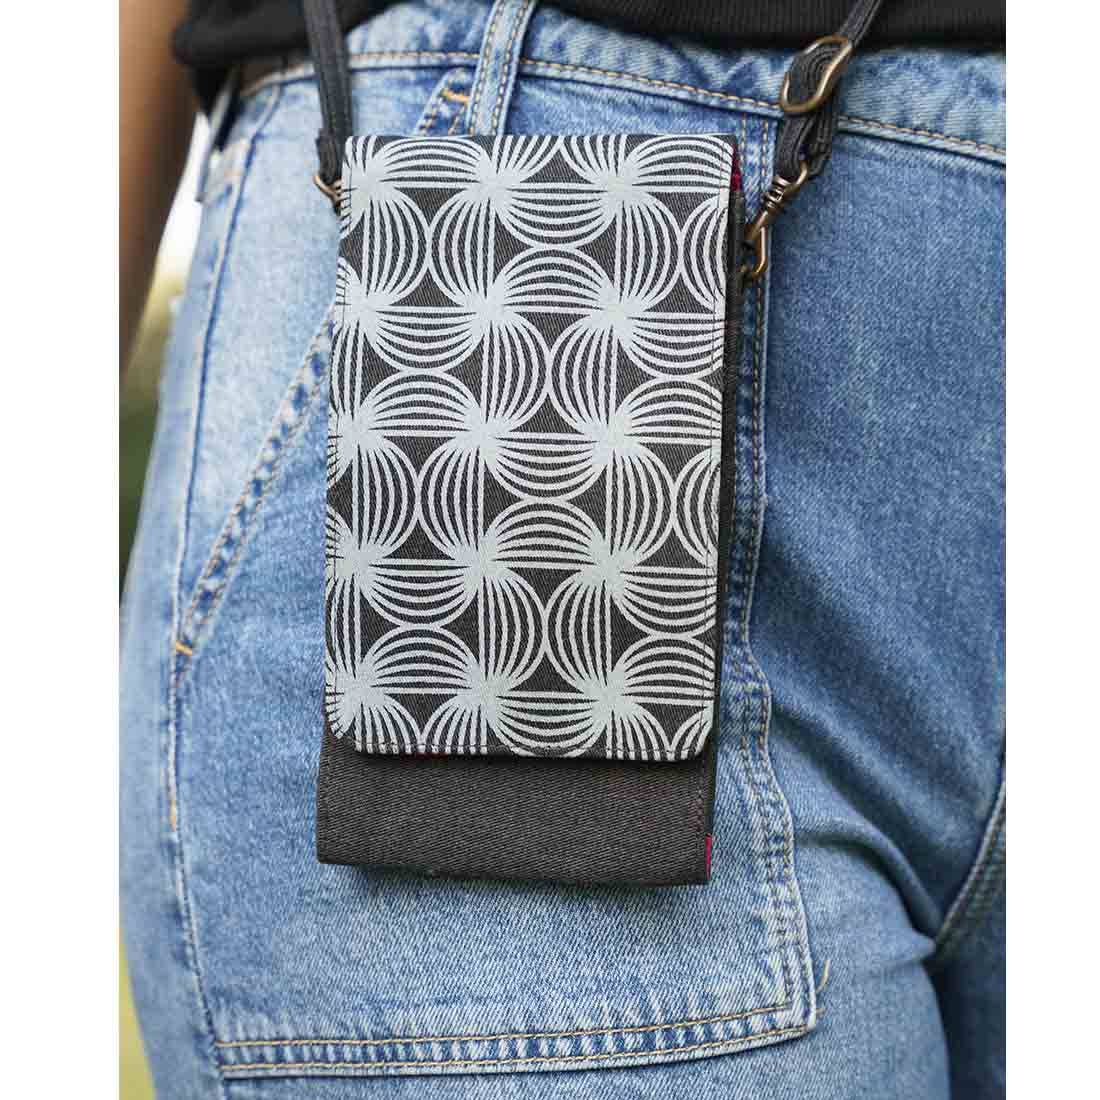 Malia Designs - Sustainable Phone Case Wallet - Bright Blue